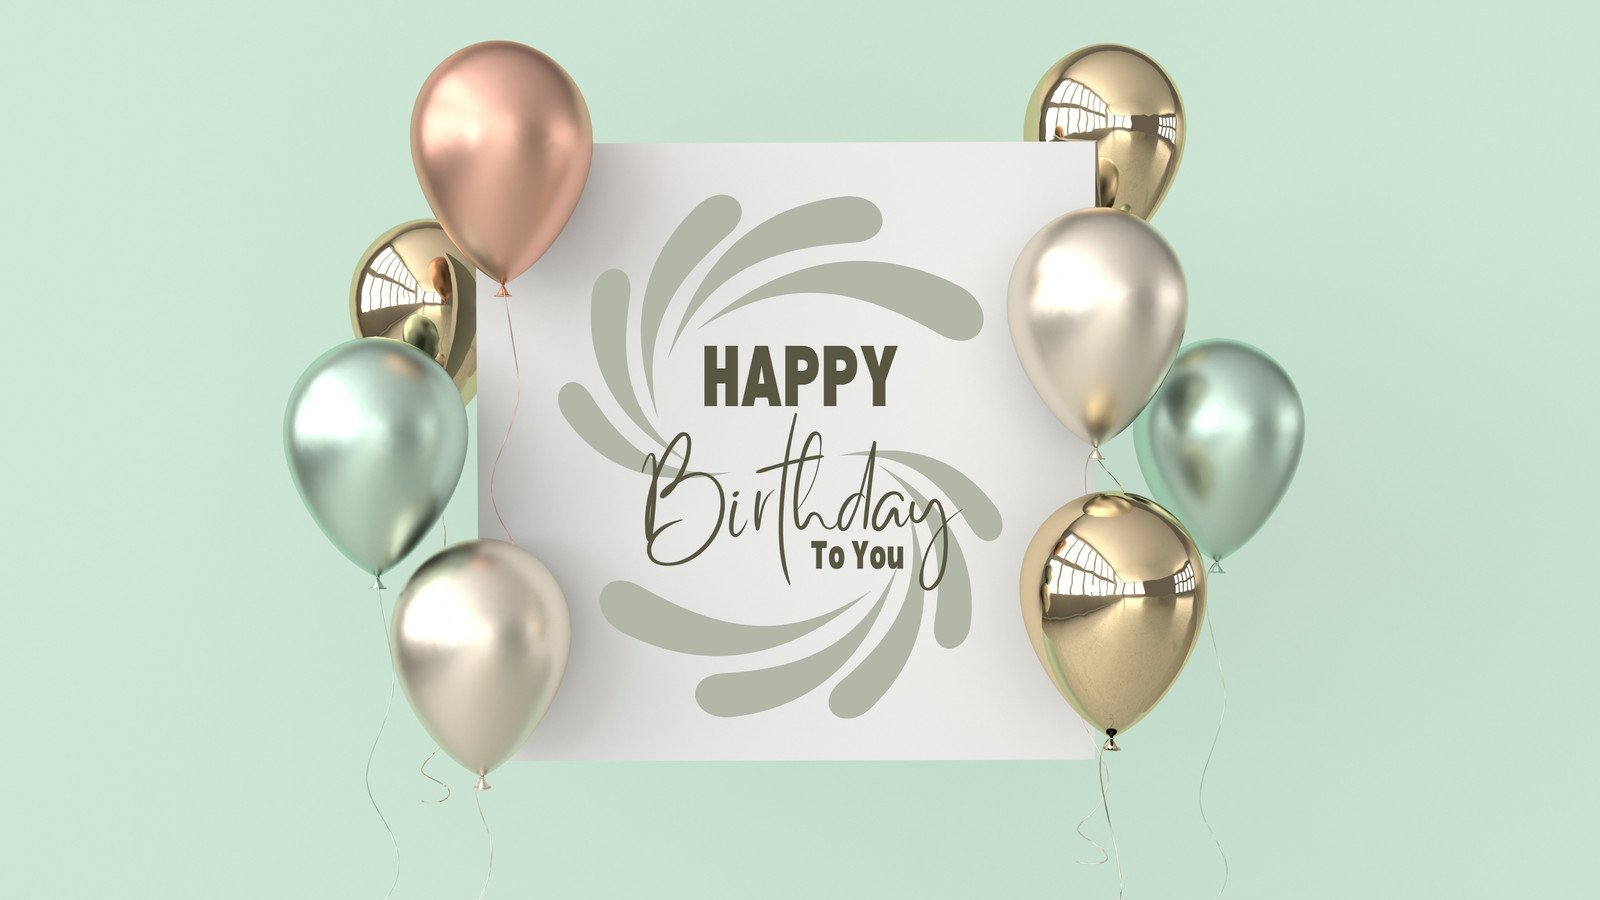 A birthday card with balloons on it - Birthday